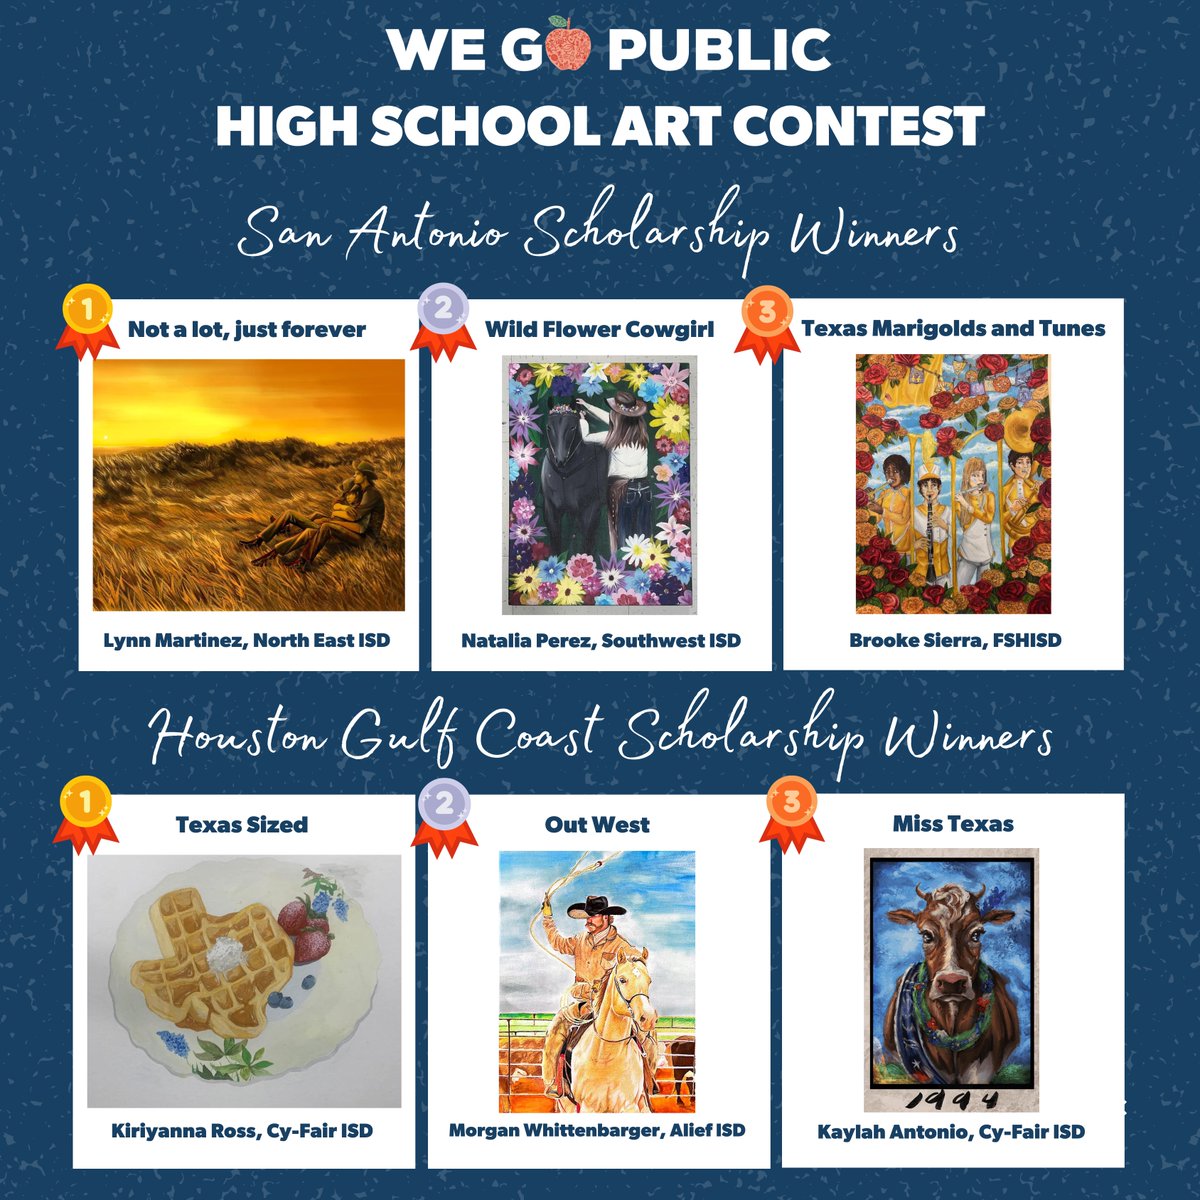 👏 Congratulations to the high school art students in both San Antonio and Houston/Gulf Coast! 🏆 Each contest had a total of 20 winners including, Top 3, scholarships, and winning artwork placed on a VIA bus and/or tote. ⭐ We were blown away by the talent from all of the